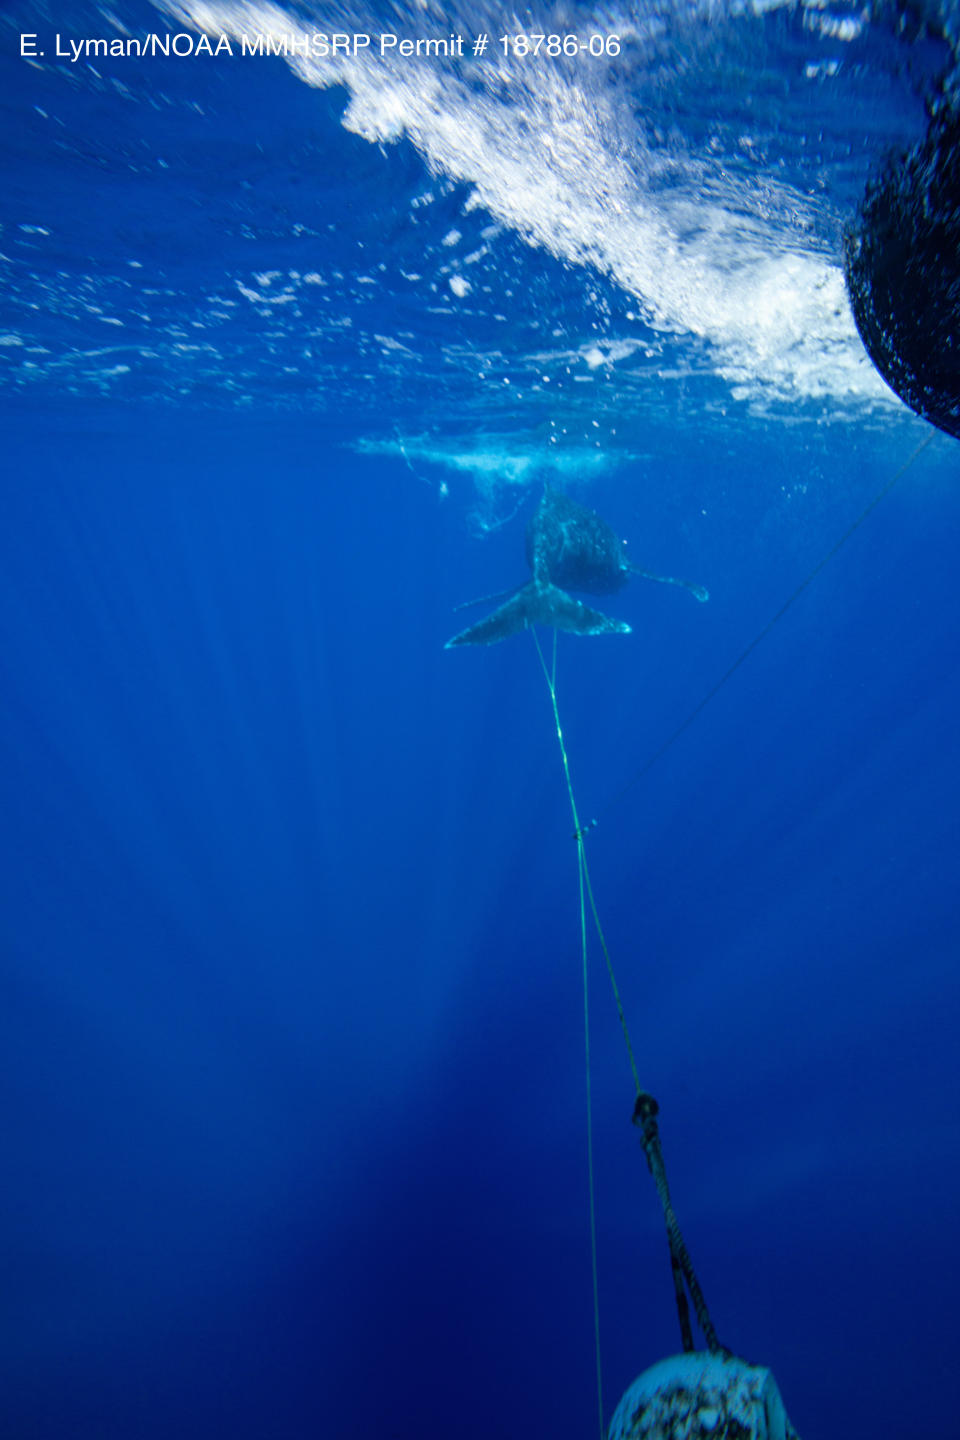 In this photo provided by the National Oceanic and Atmospheric Administration, officials remove mooring line and a buoy from a young humpback whale off Ukumehame, Maui, Wednesday, Jan. 26, 2022. Federal officials say the yearling humpback was freed from entanglement in gear that included about 140 feet of line and a plastic trawling buoy. (Ed Lyman/NOAA via AP)